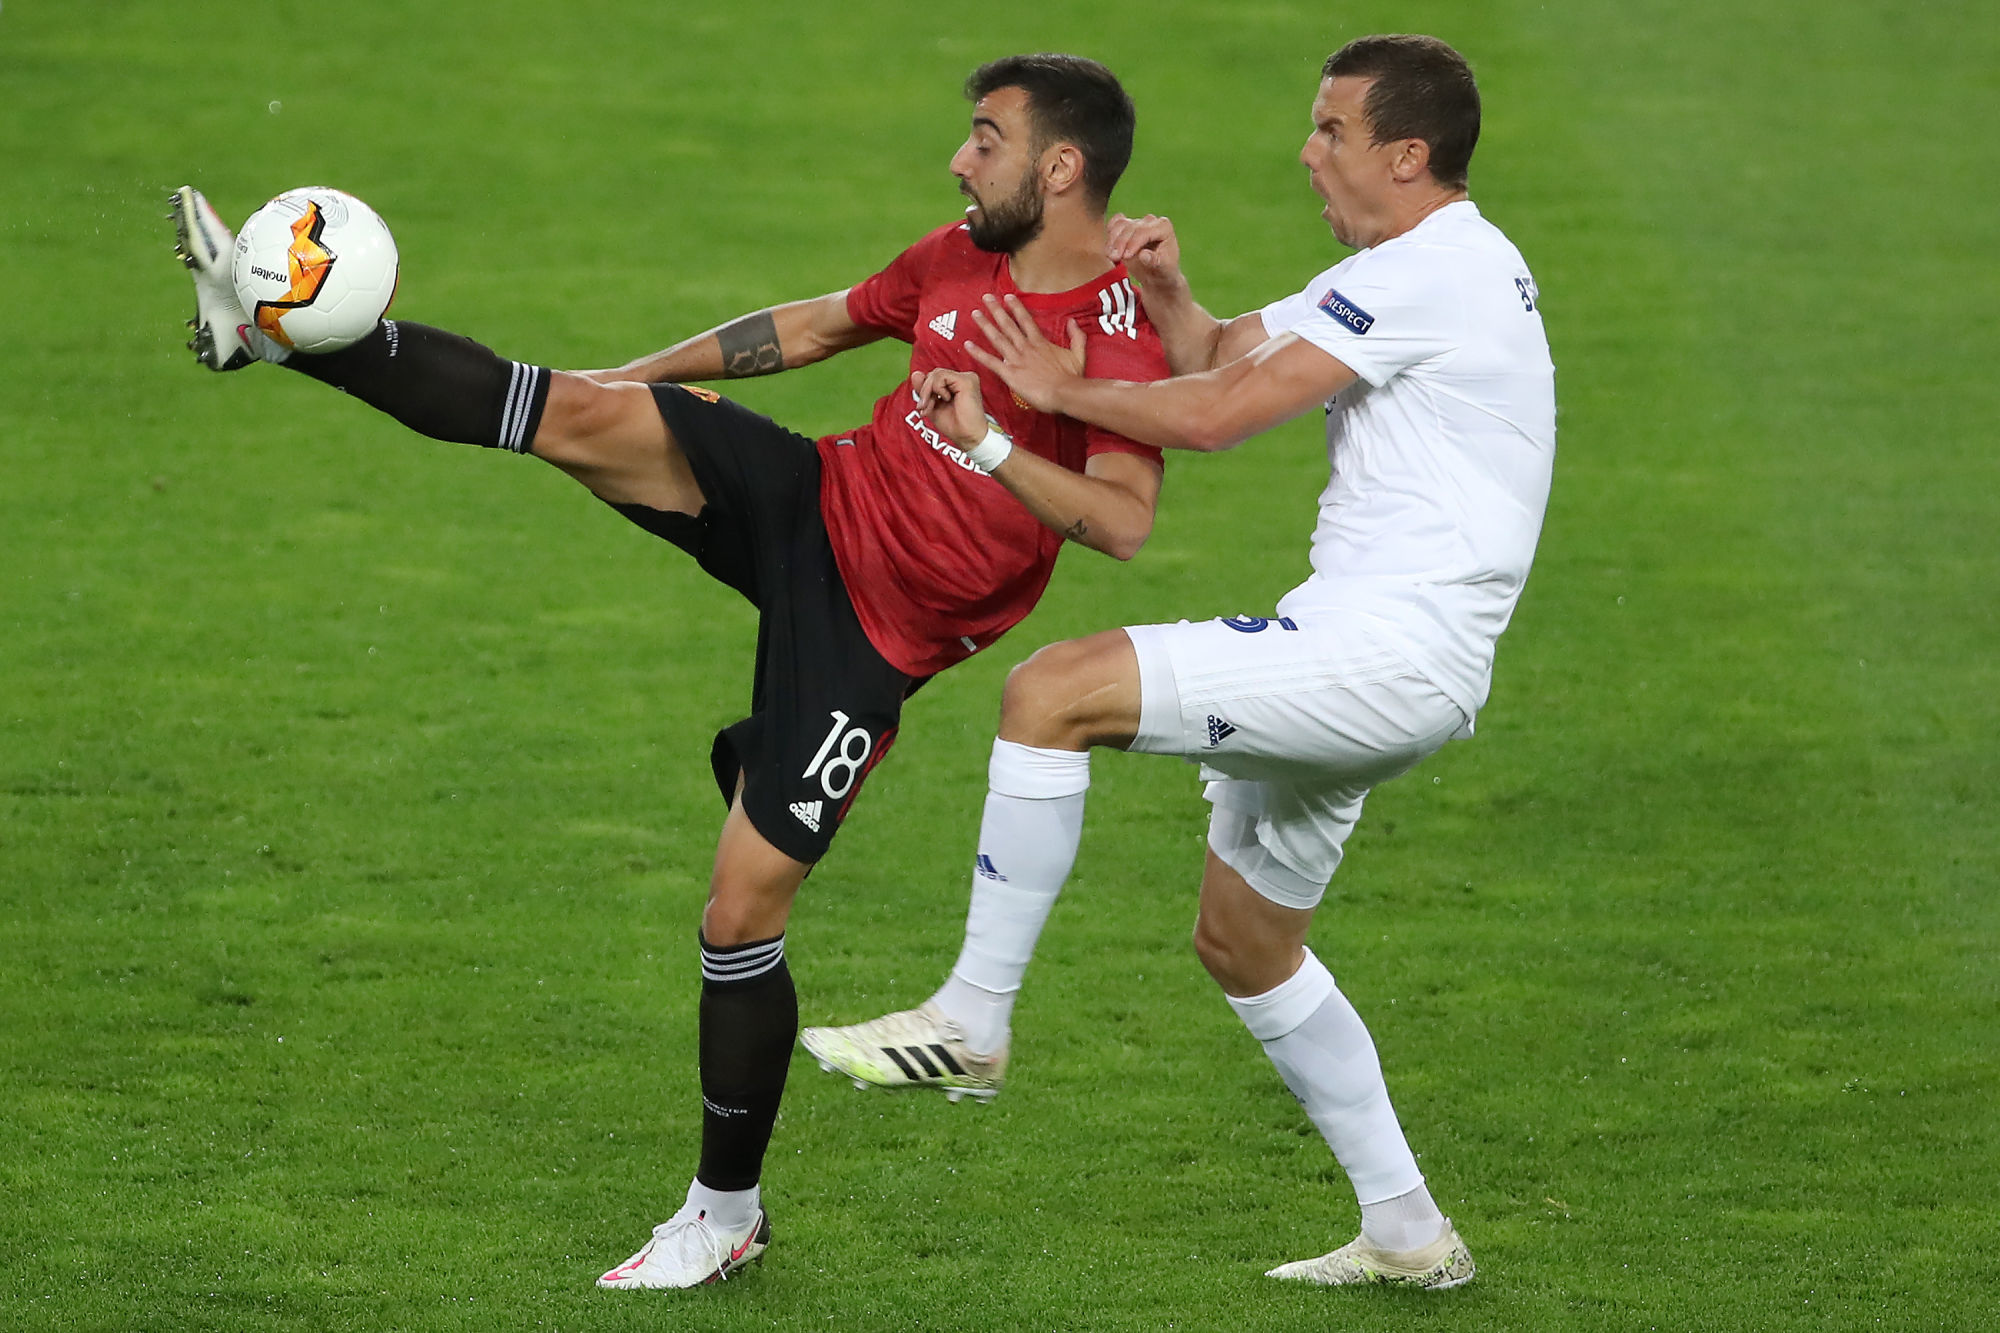 COLOGNE, GERMANY - AUGUST 10: Bruno Fernandes of Manchester United battles for possession with Andreas Bjelland of FC Kobenhavn during the UEFA Europa League Quarter Final between Manchester United and FC Kobenhavn at RheinEnergieStadion on August 10, 2020 in Cologne, Germany. (Photo by Alex Grimm - UEFA/POOL/Icon Sport) - RheinEnergieStadion - Cologne (Allemagne)